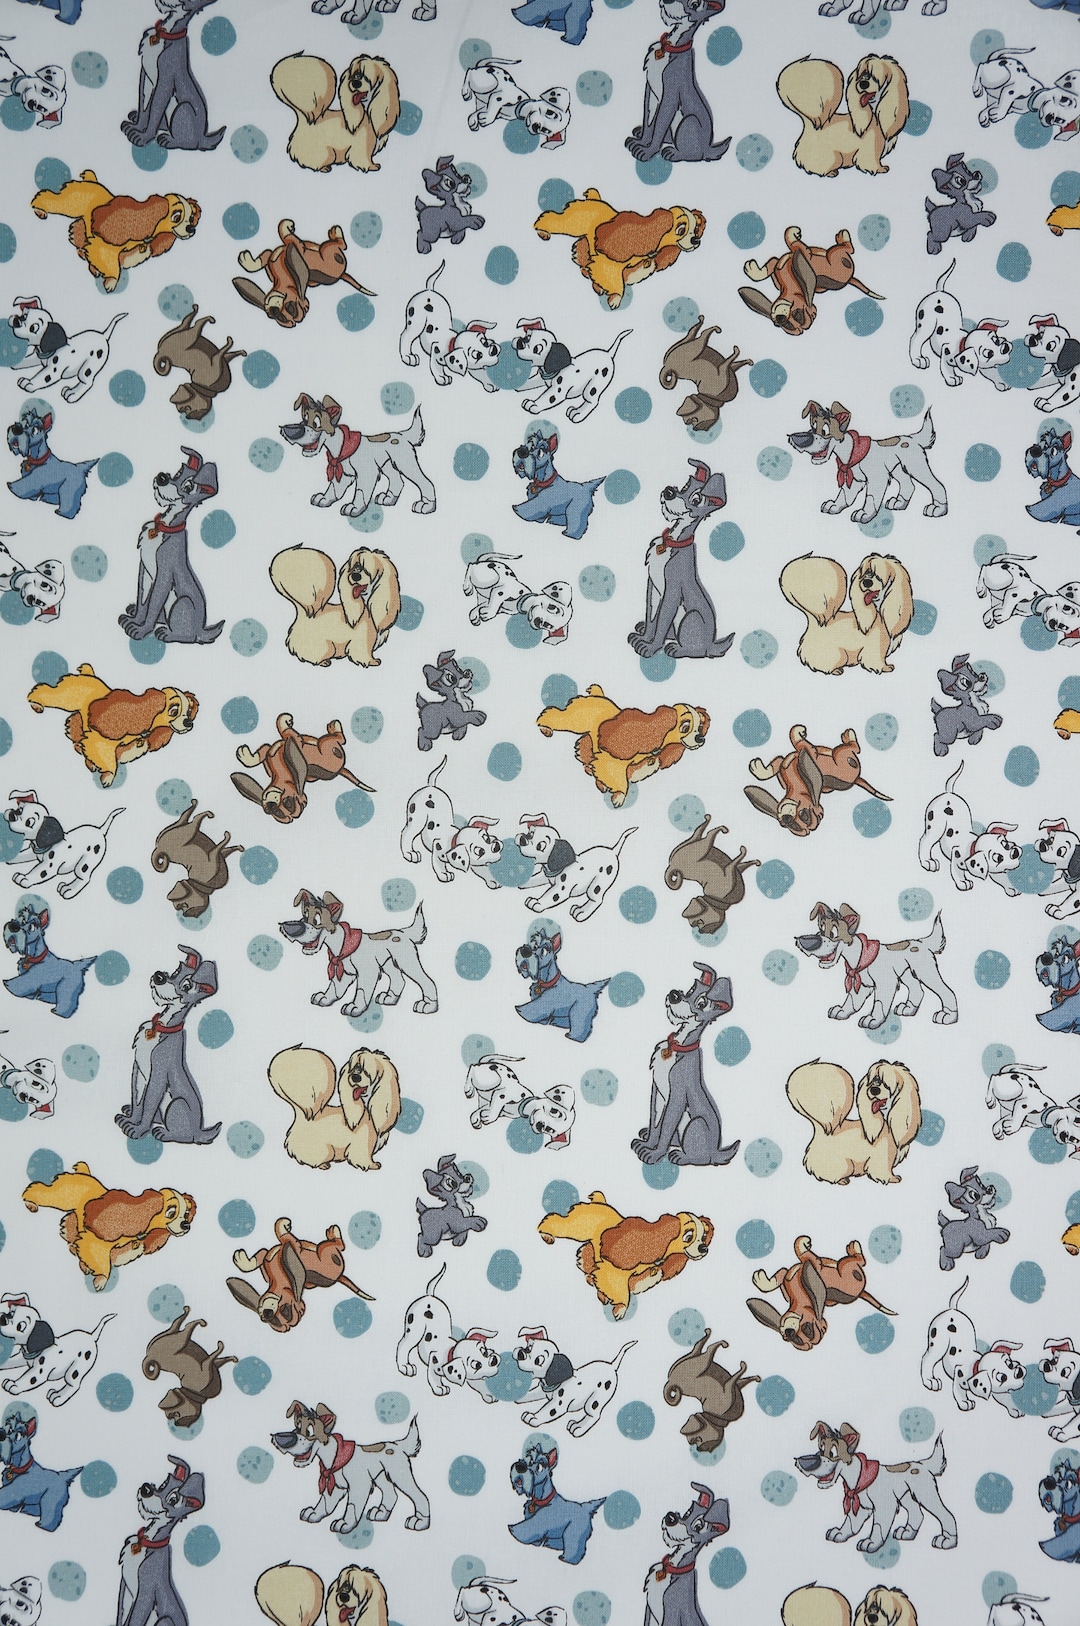 Springs Creative - Winnie The Pooh and Hunny Jar- Authentic Disney Licensed  Fabric - Cotton Quilting Fabric by the yard